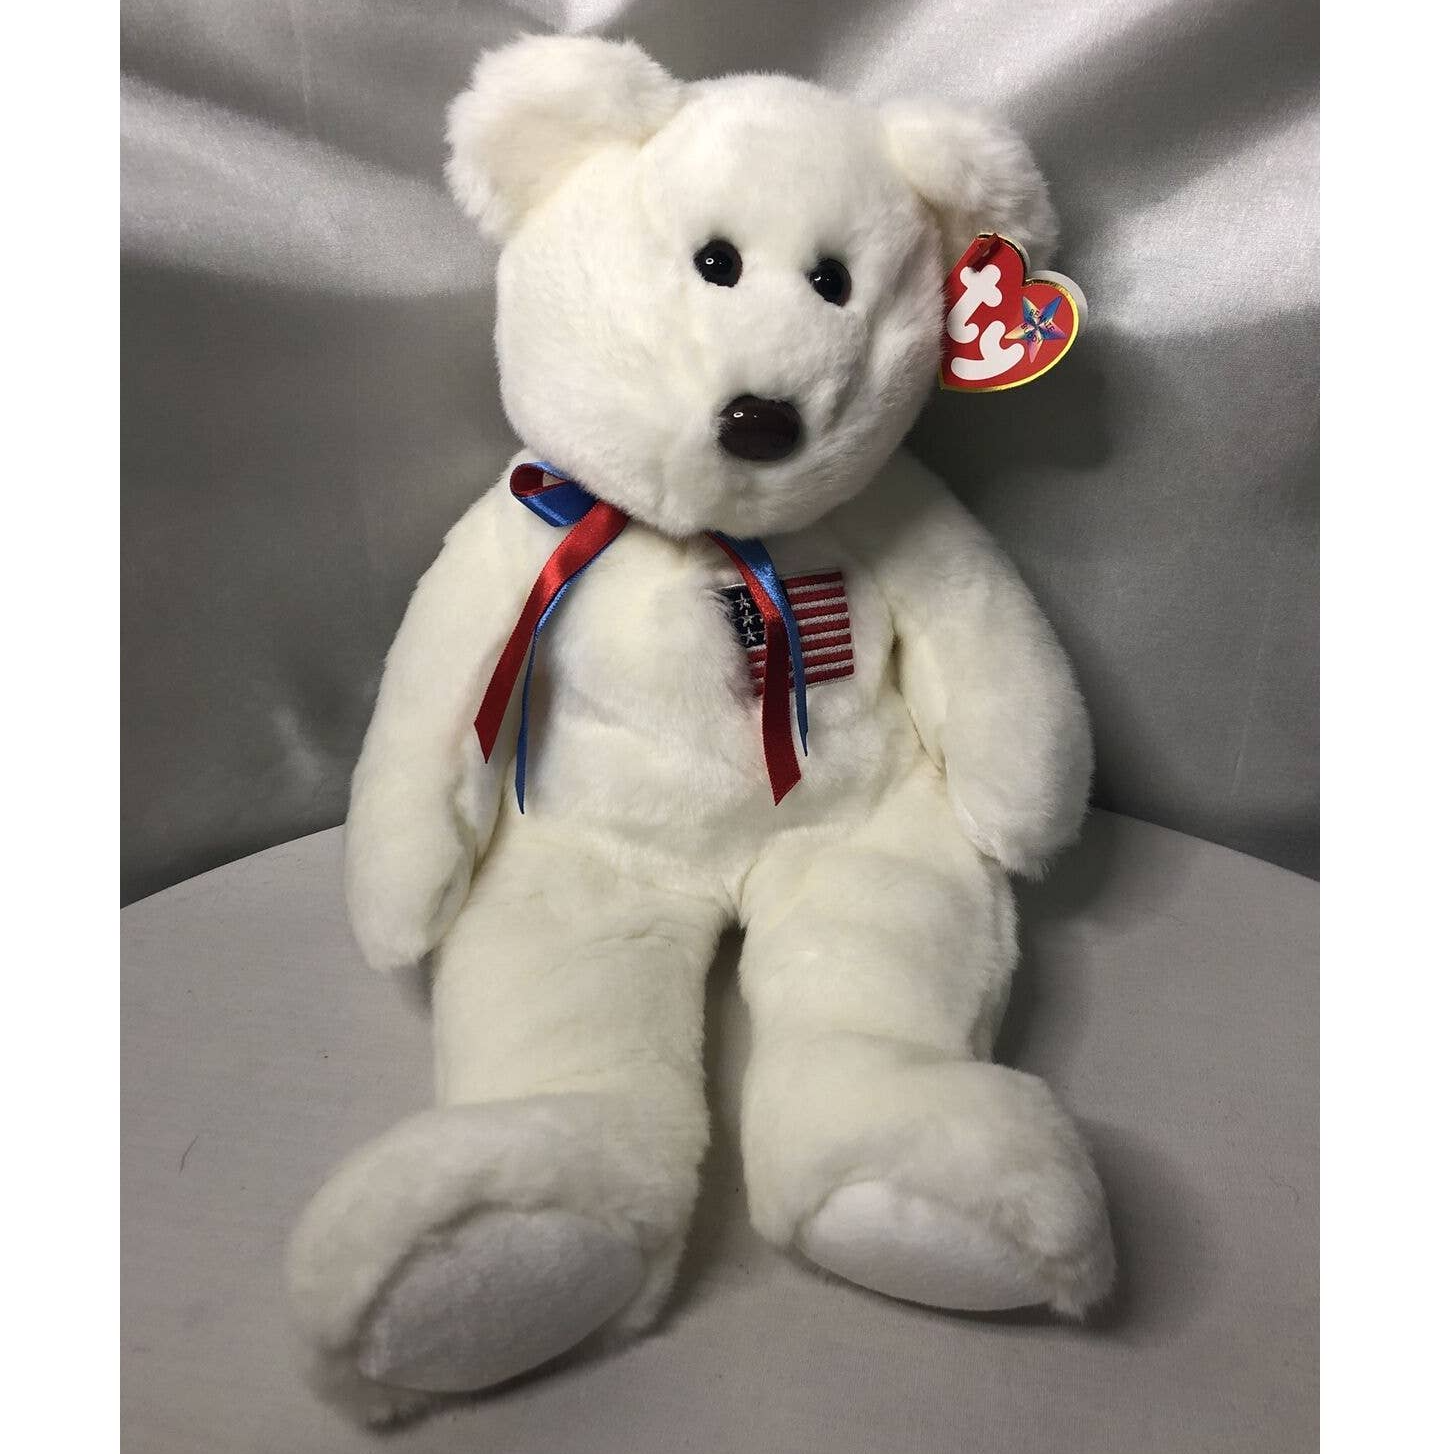 Ty Beanie Buddies 14" Beanie Baby 'LIBEARTY' The Bear 2000 With Tag Retired - $10.38